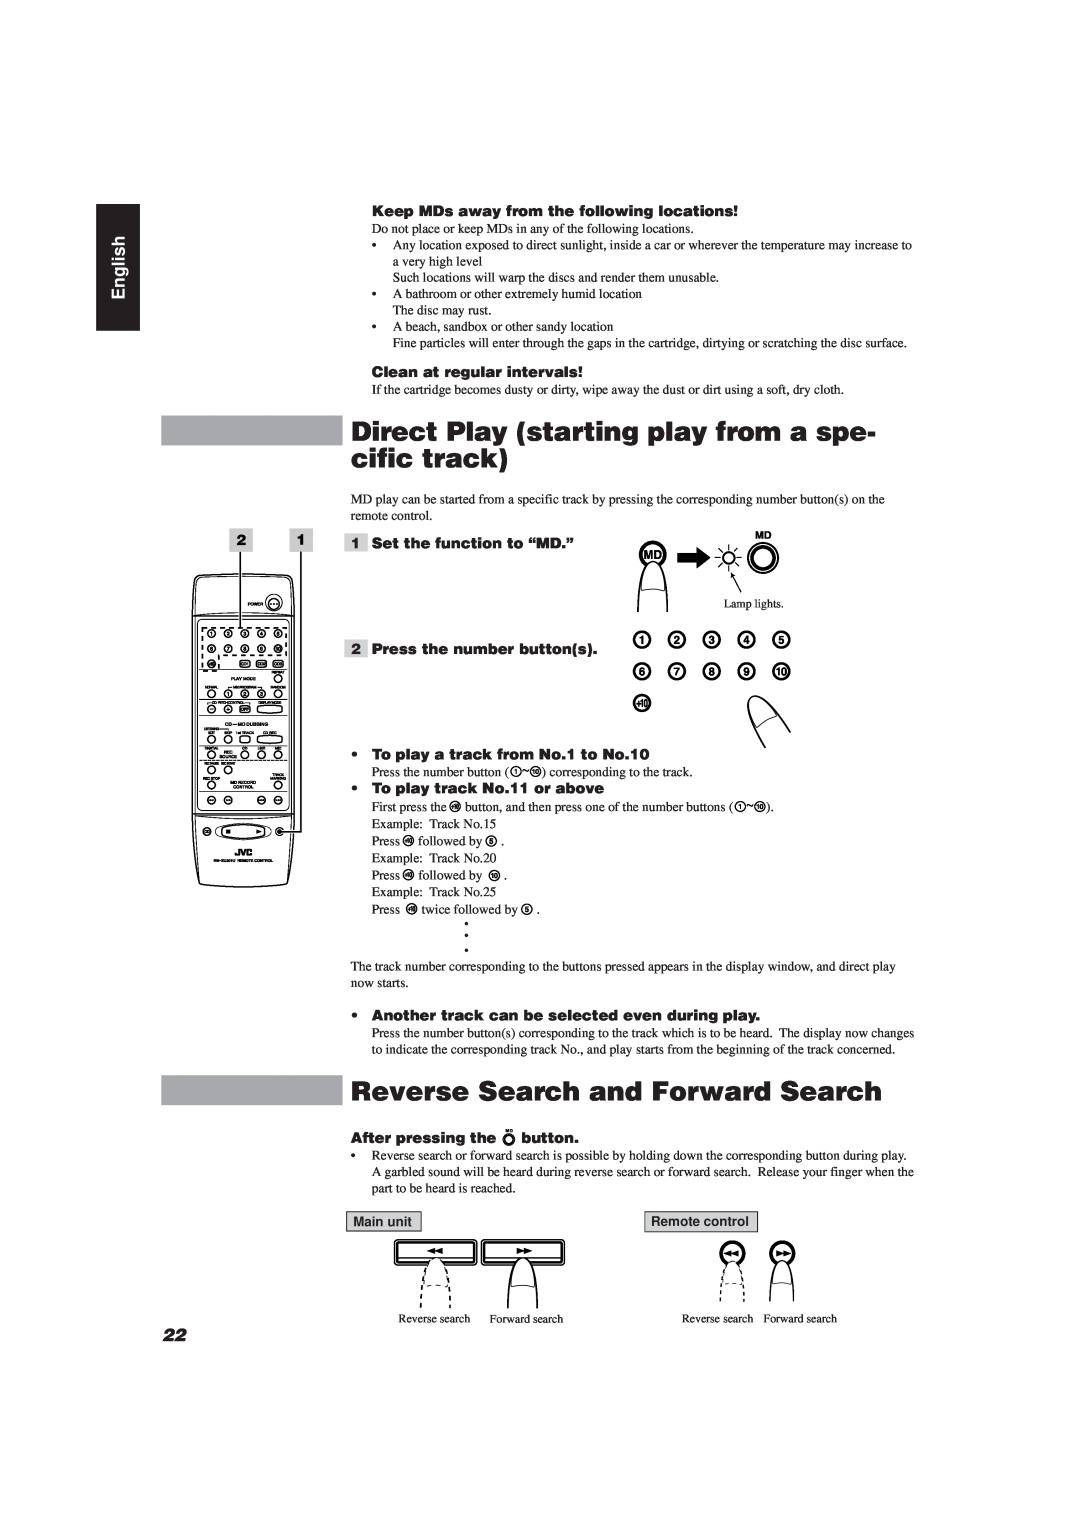 JVC XU-301 manual Direct Play starting play from a spe- cific track, Reverse Search and Forward Search, English 